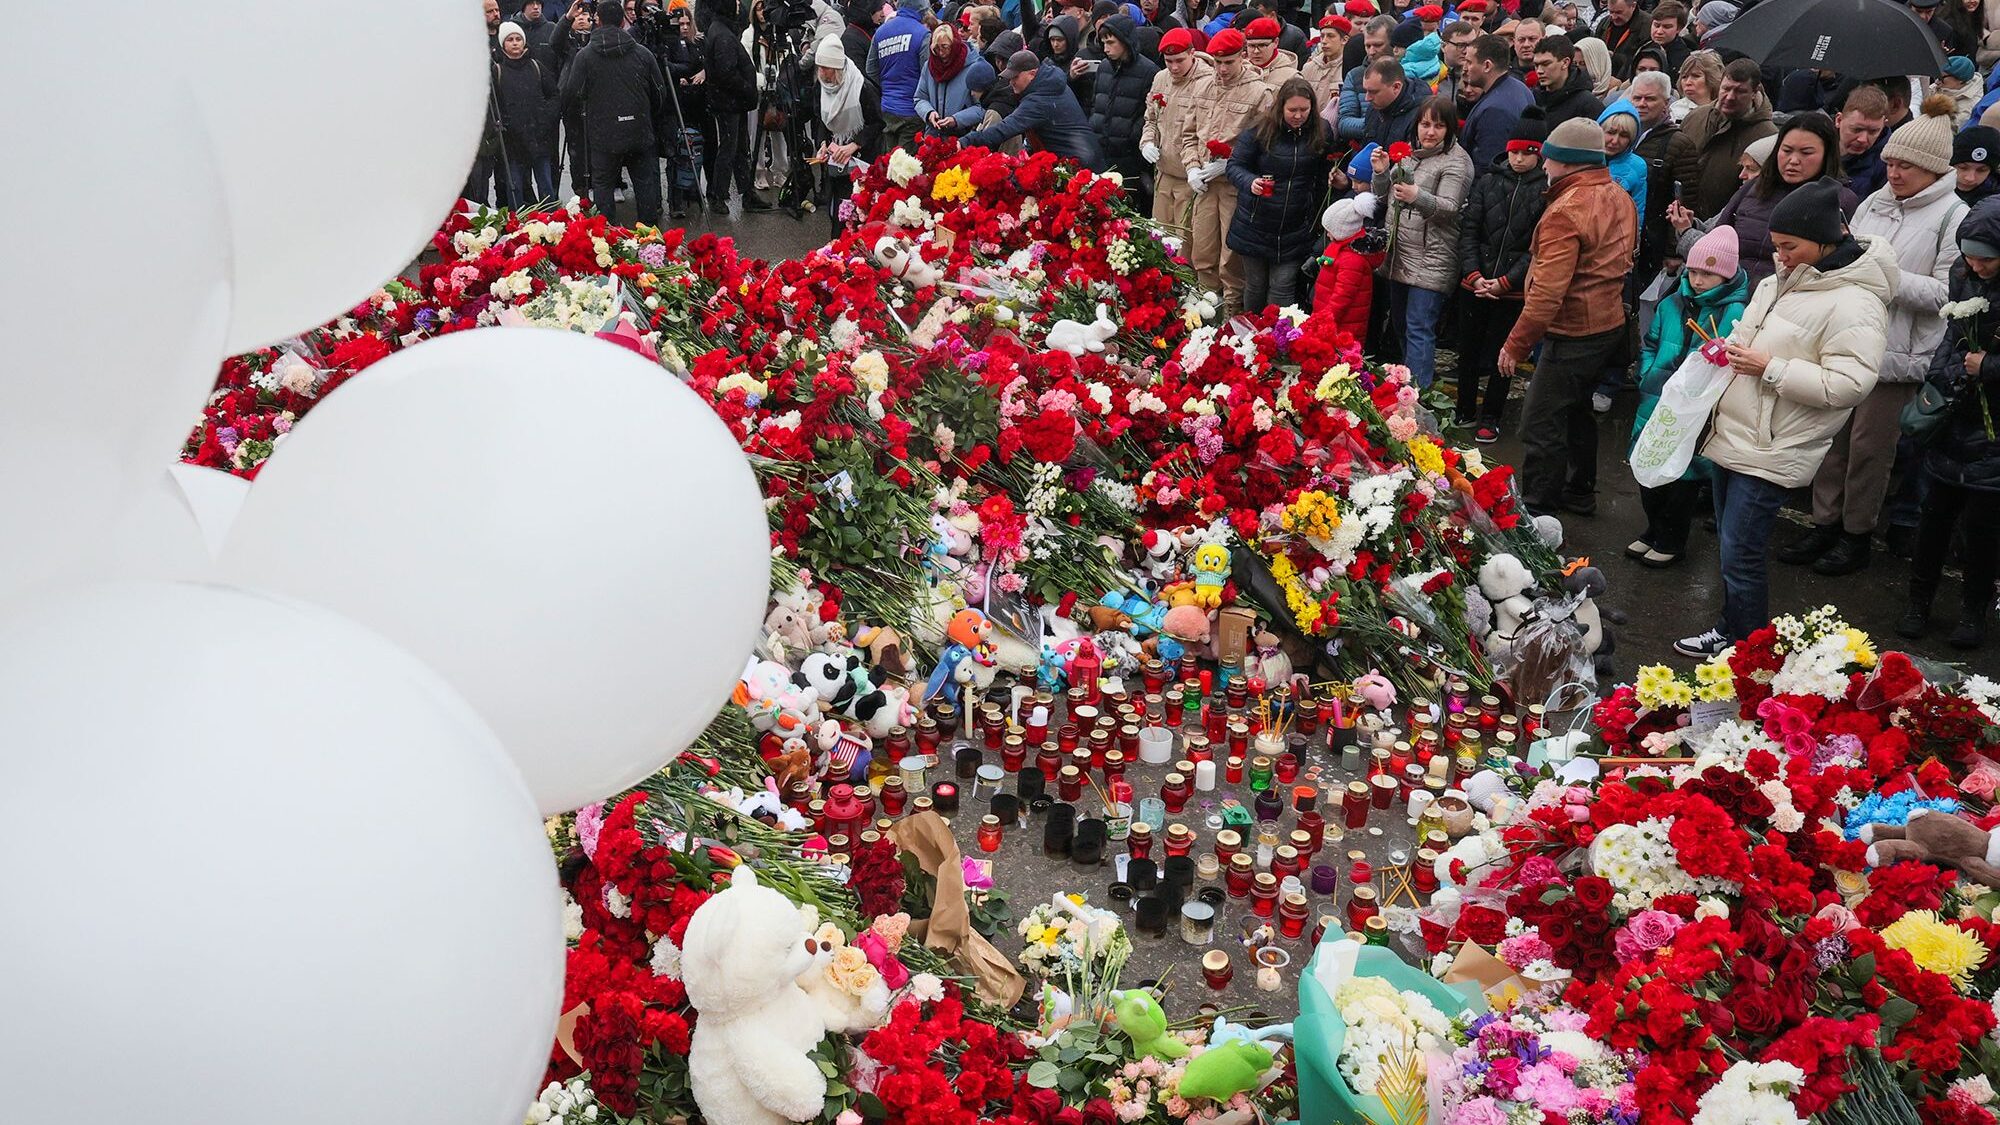 People place flowers at a memorial outside Crocus City Hall in Moscow on Sunday following Friday's ...